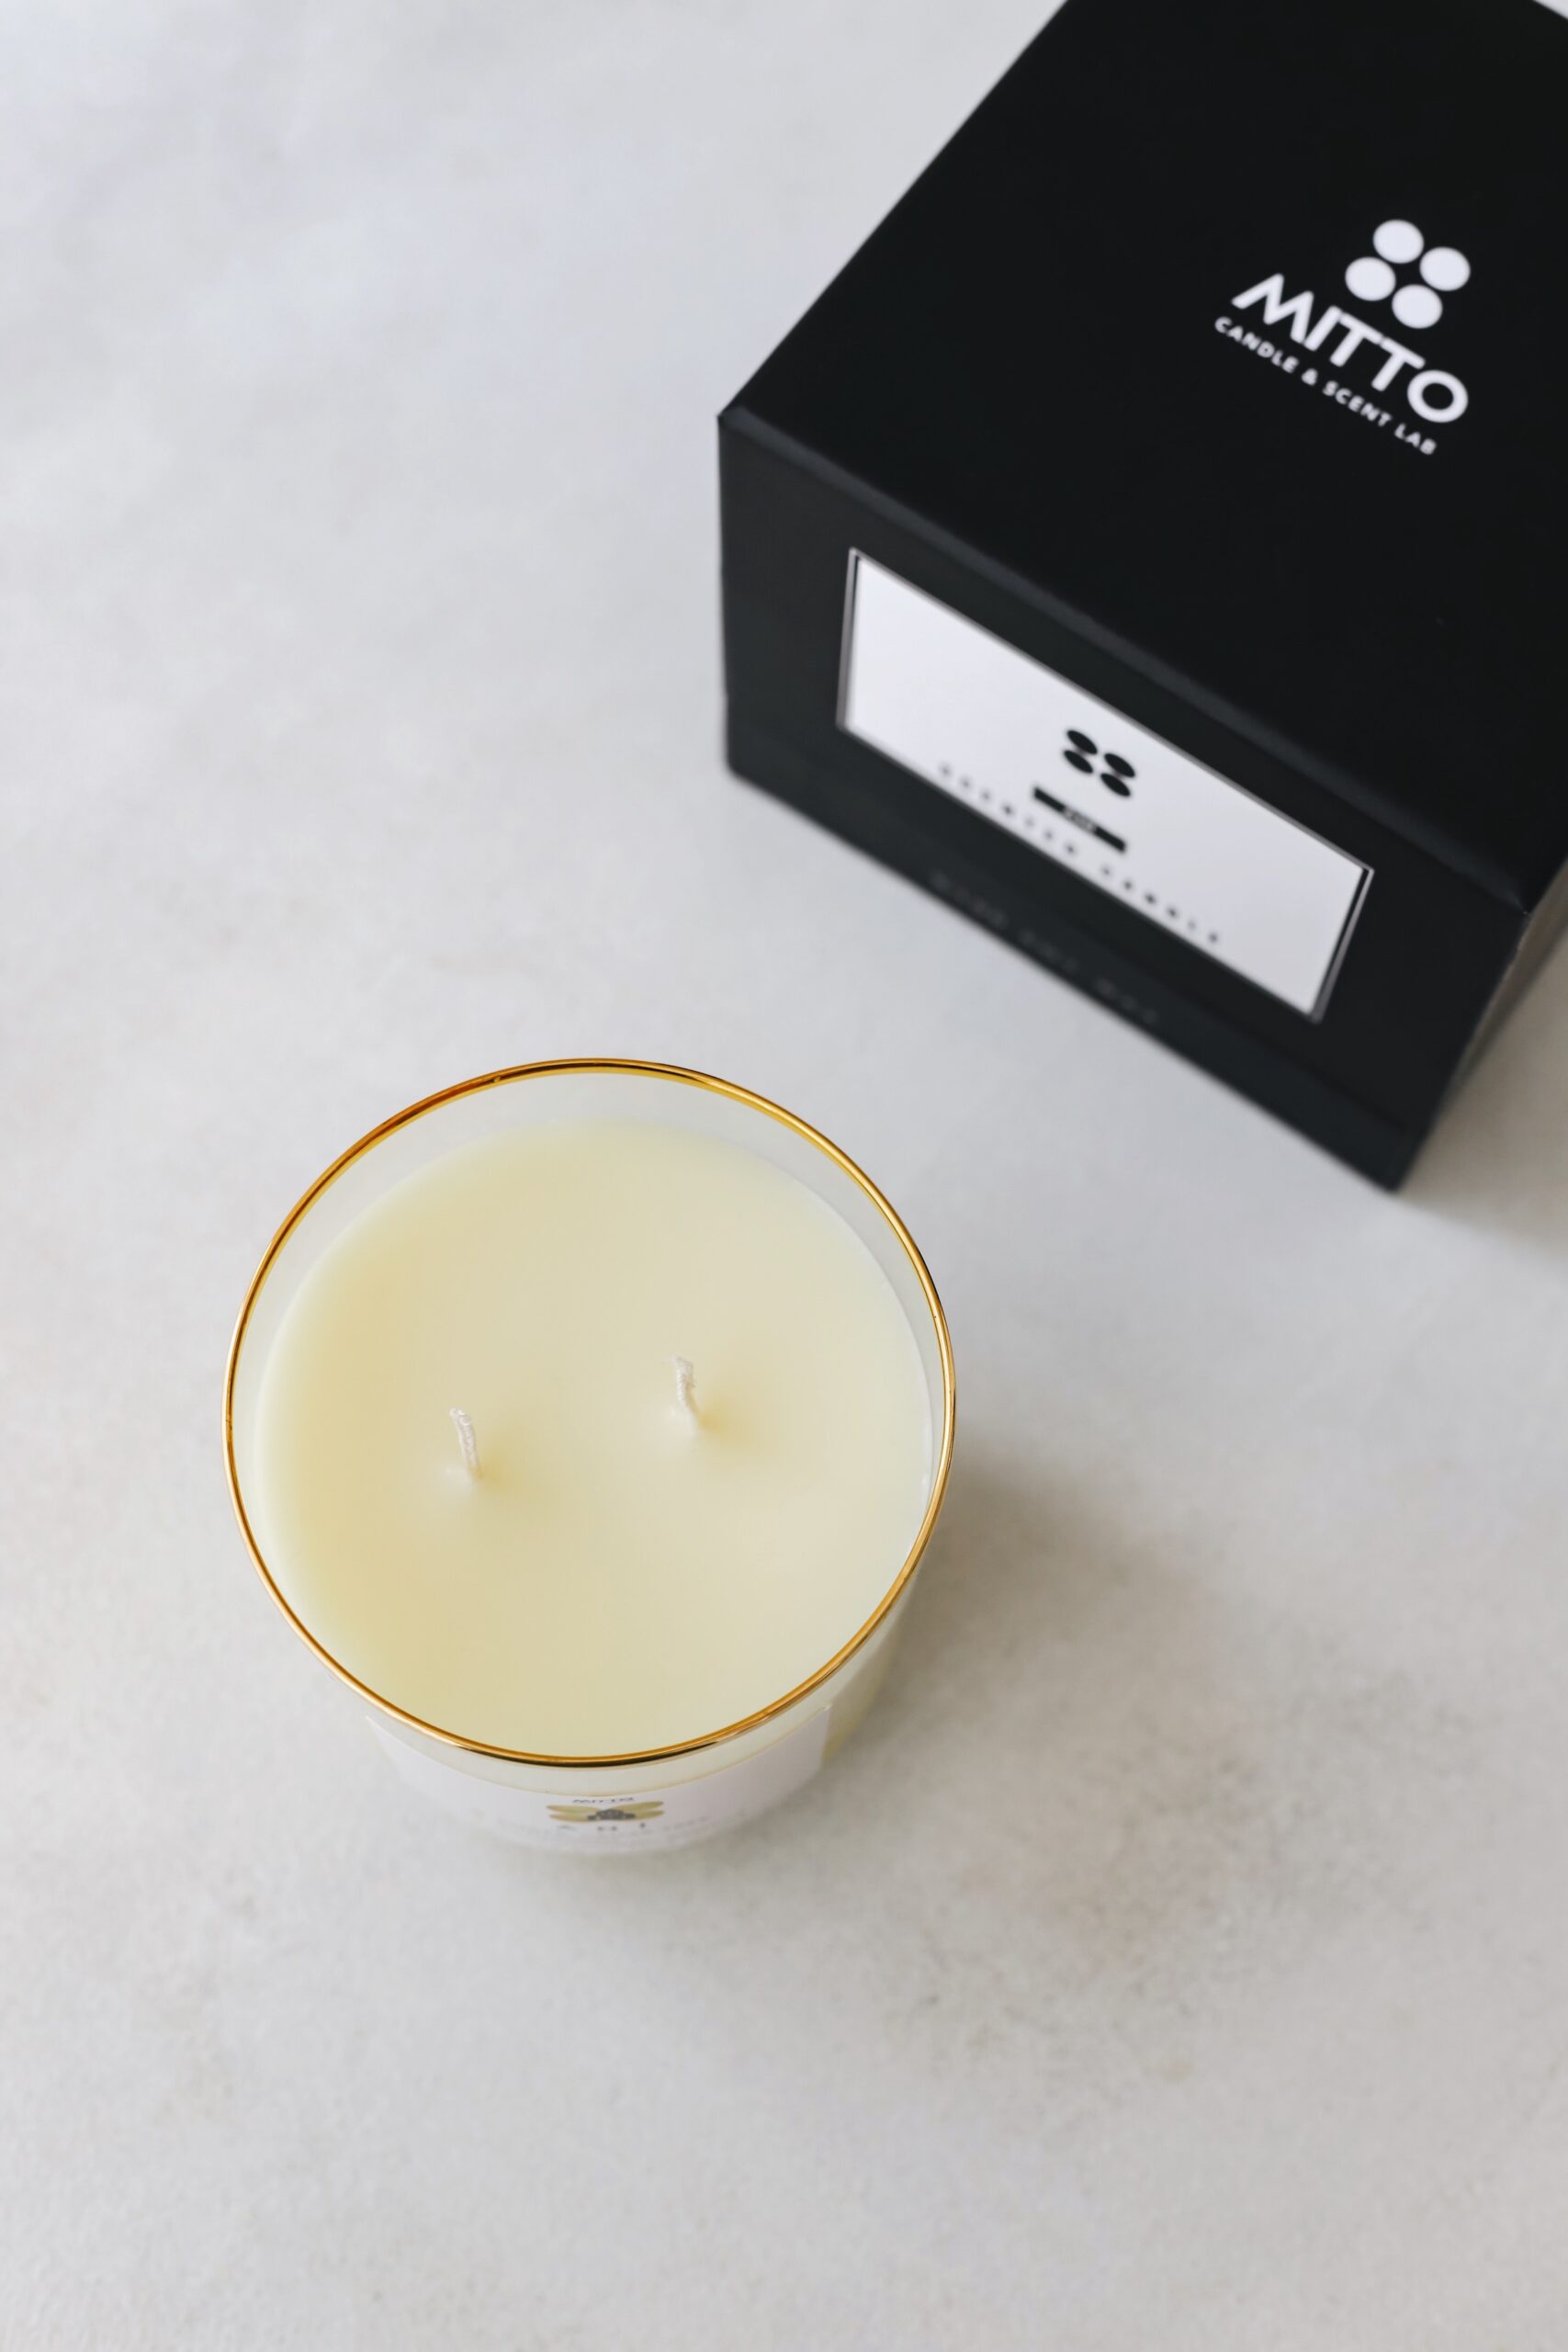 Ani candle is a soy wax handmade with smell aroma note vegan fragrant stink essence. Sustainable natural light romantic decorative accessory